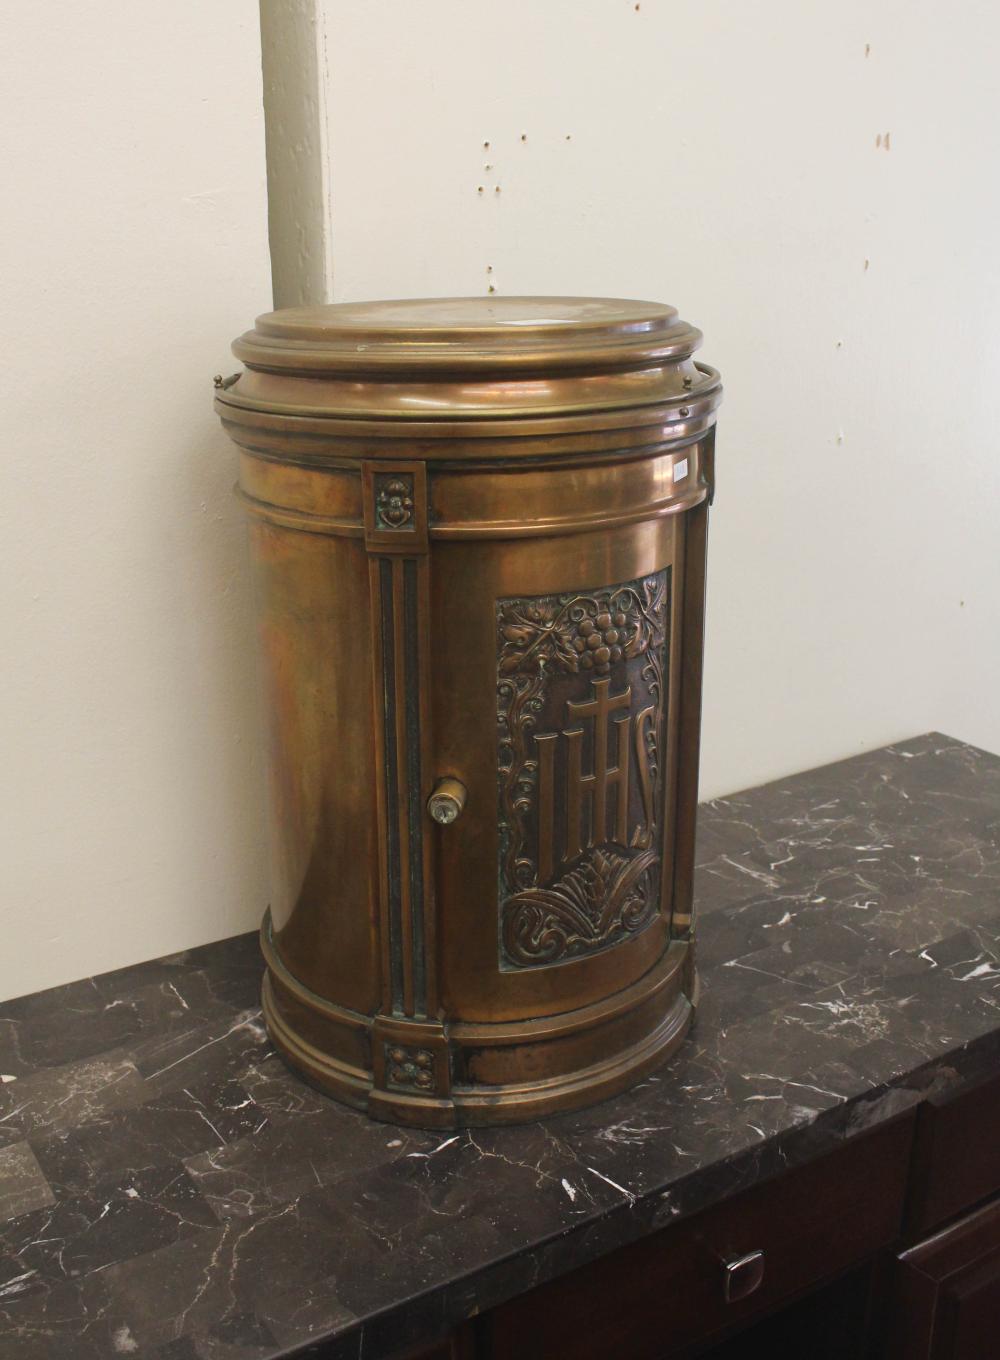 VINTAGE CYLINDRICAL BRASS TABERNACLEVINTAGE